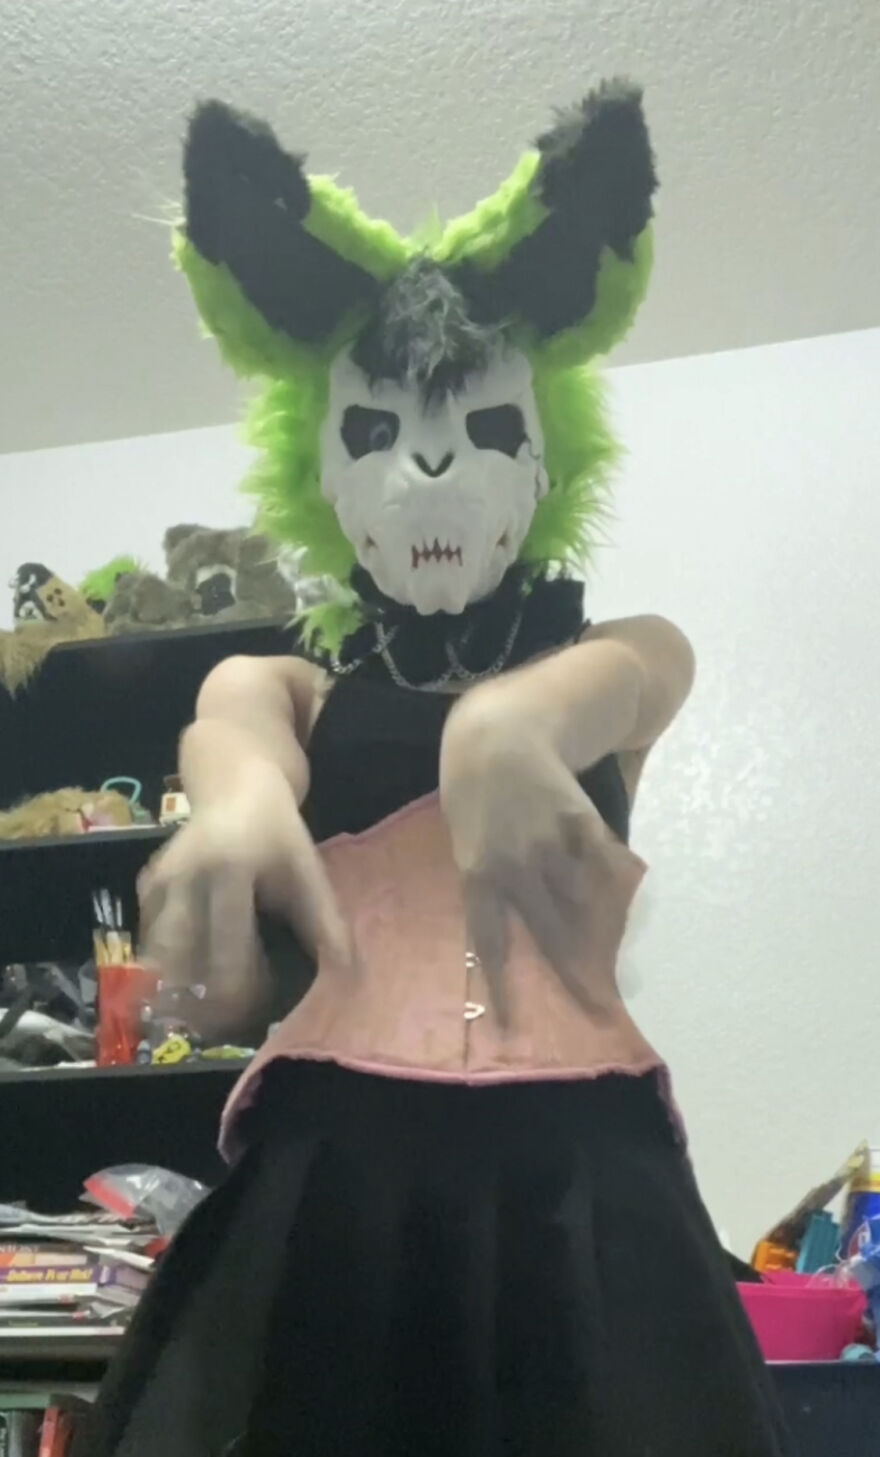 I Might Also Wear This (Screenshot From A Video)